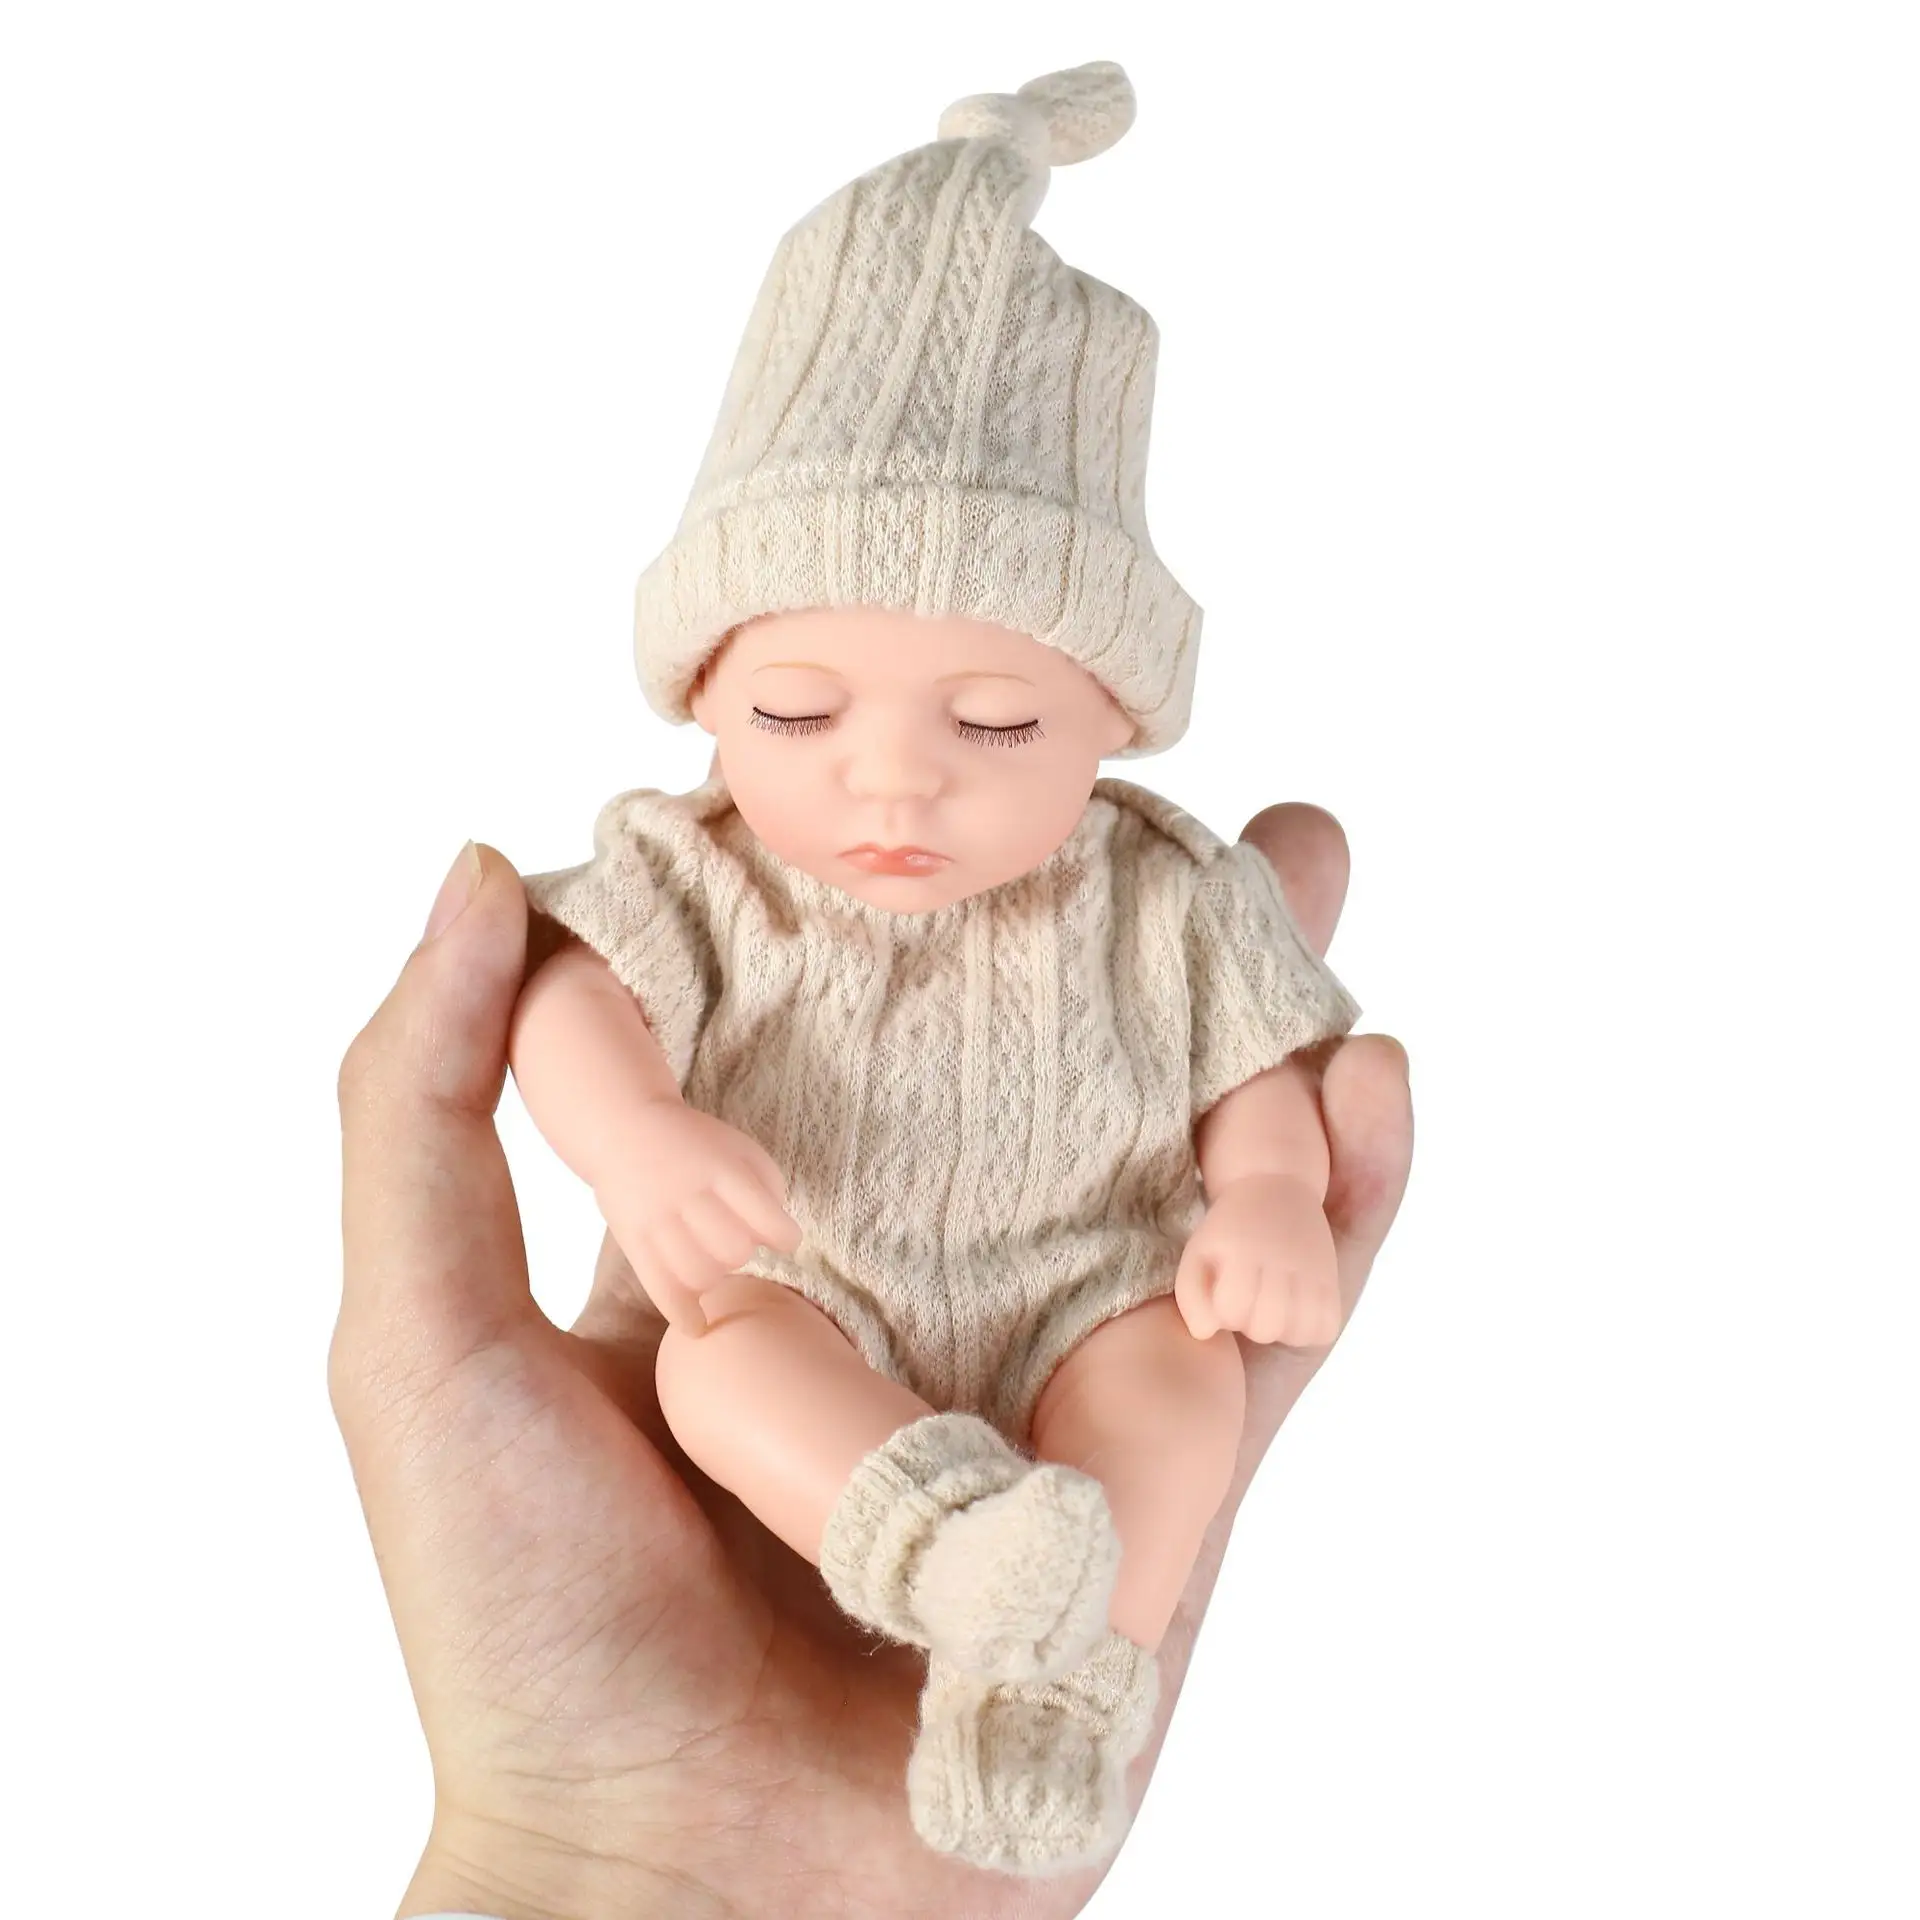 Hot sell 7 Inch full body soft vinyl silicone reborn doll OEM & ODM warmly accepted